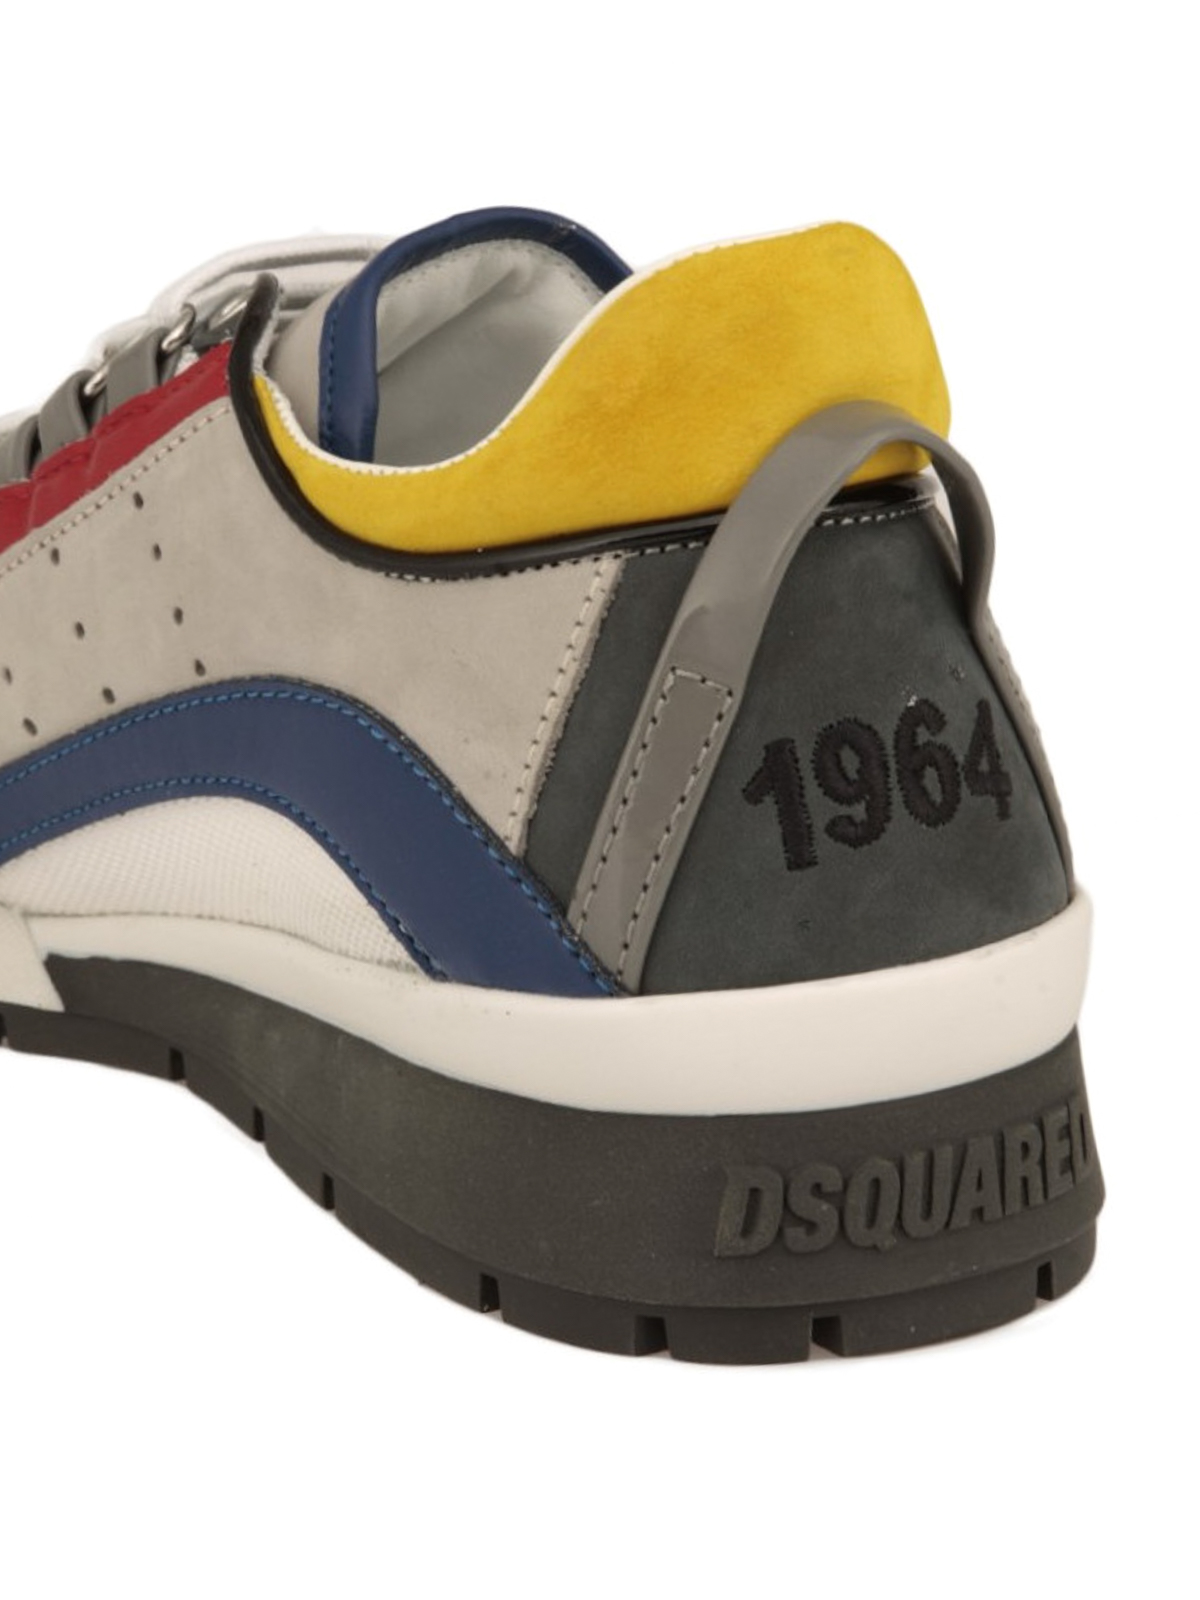 dsquared 1964 trainers